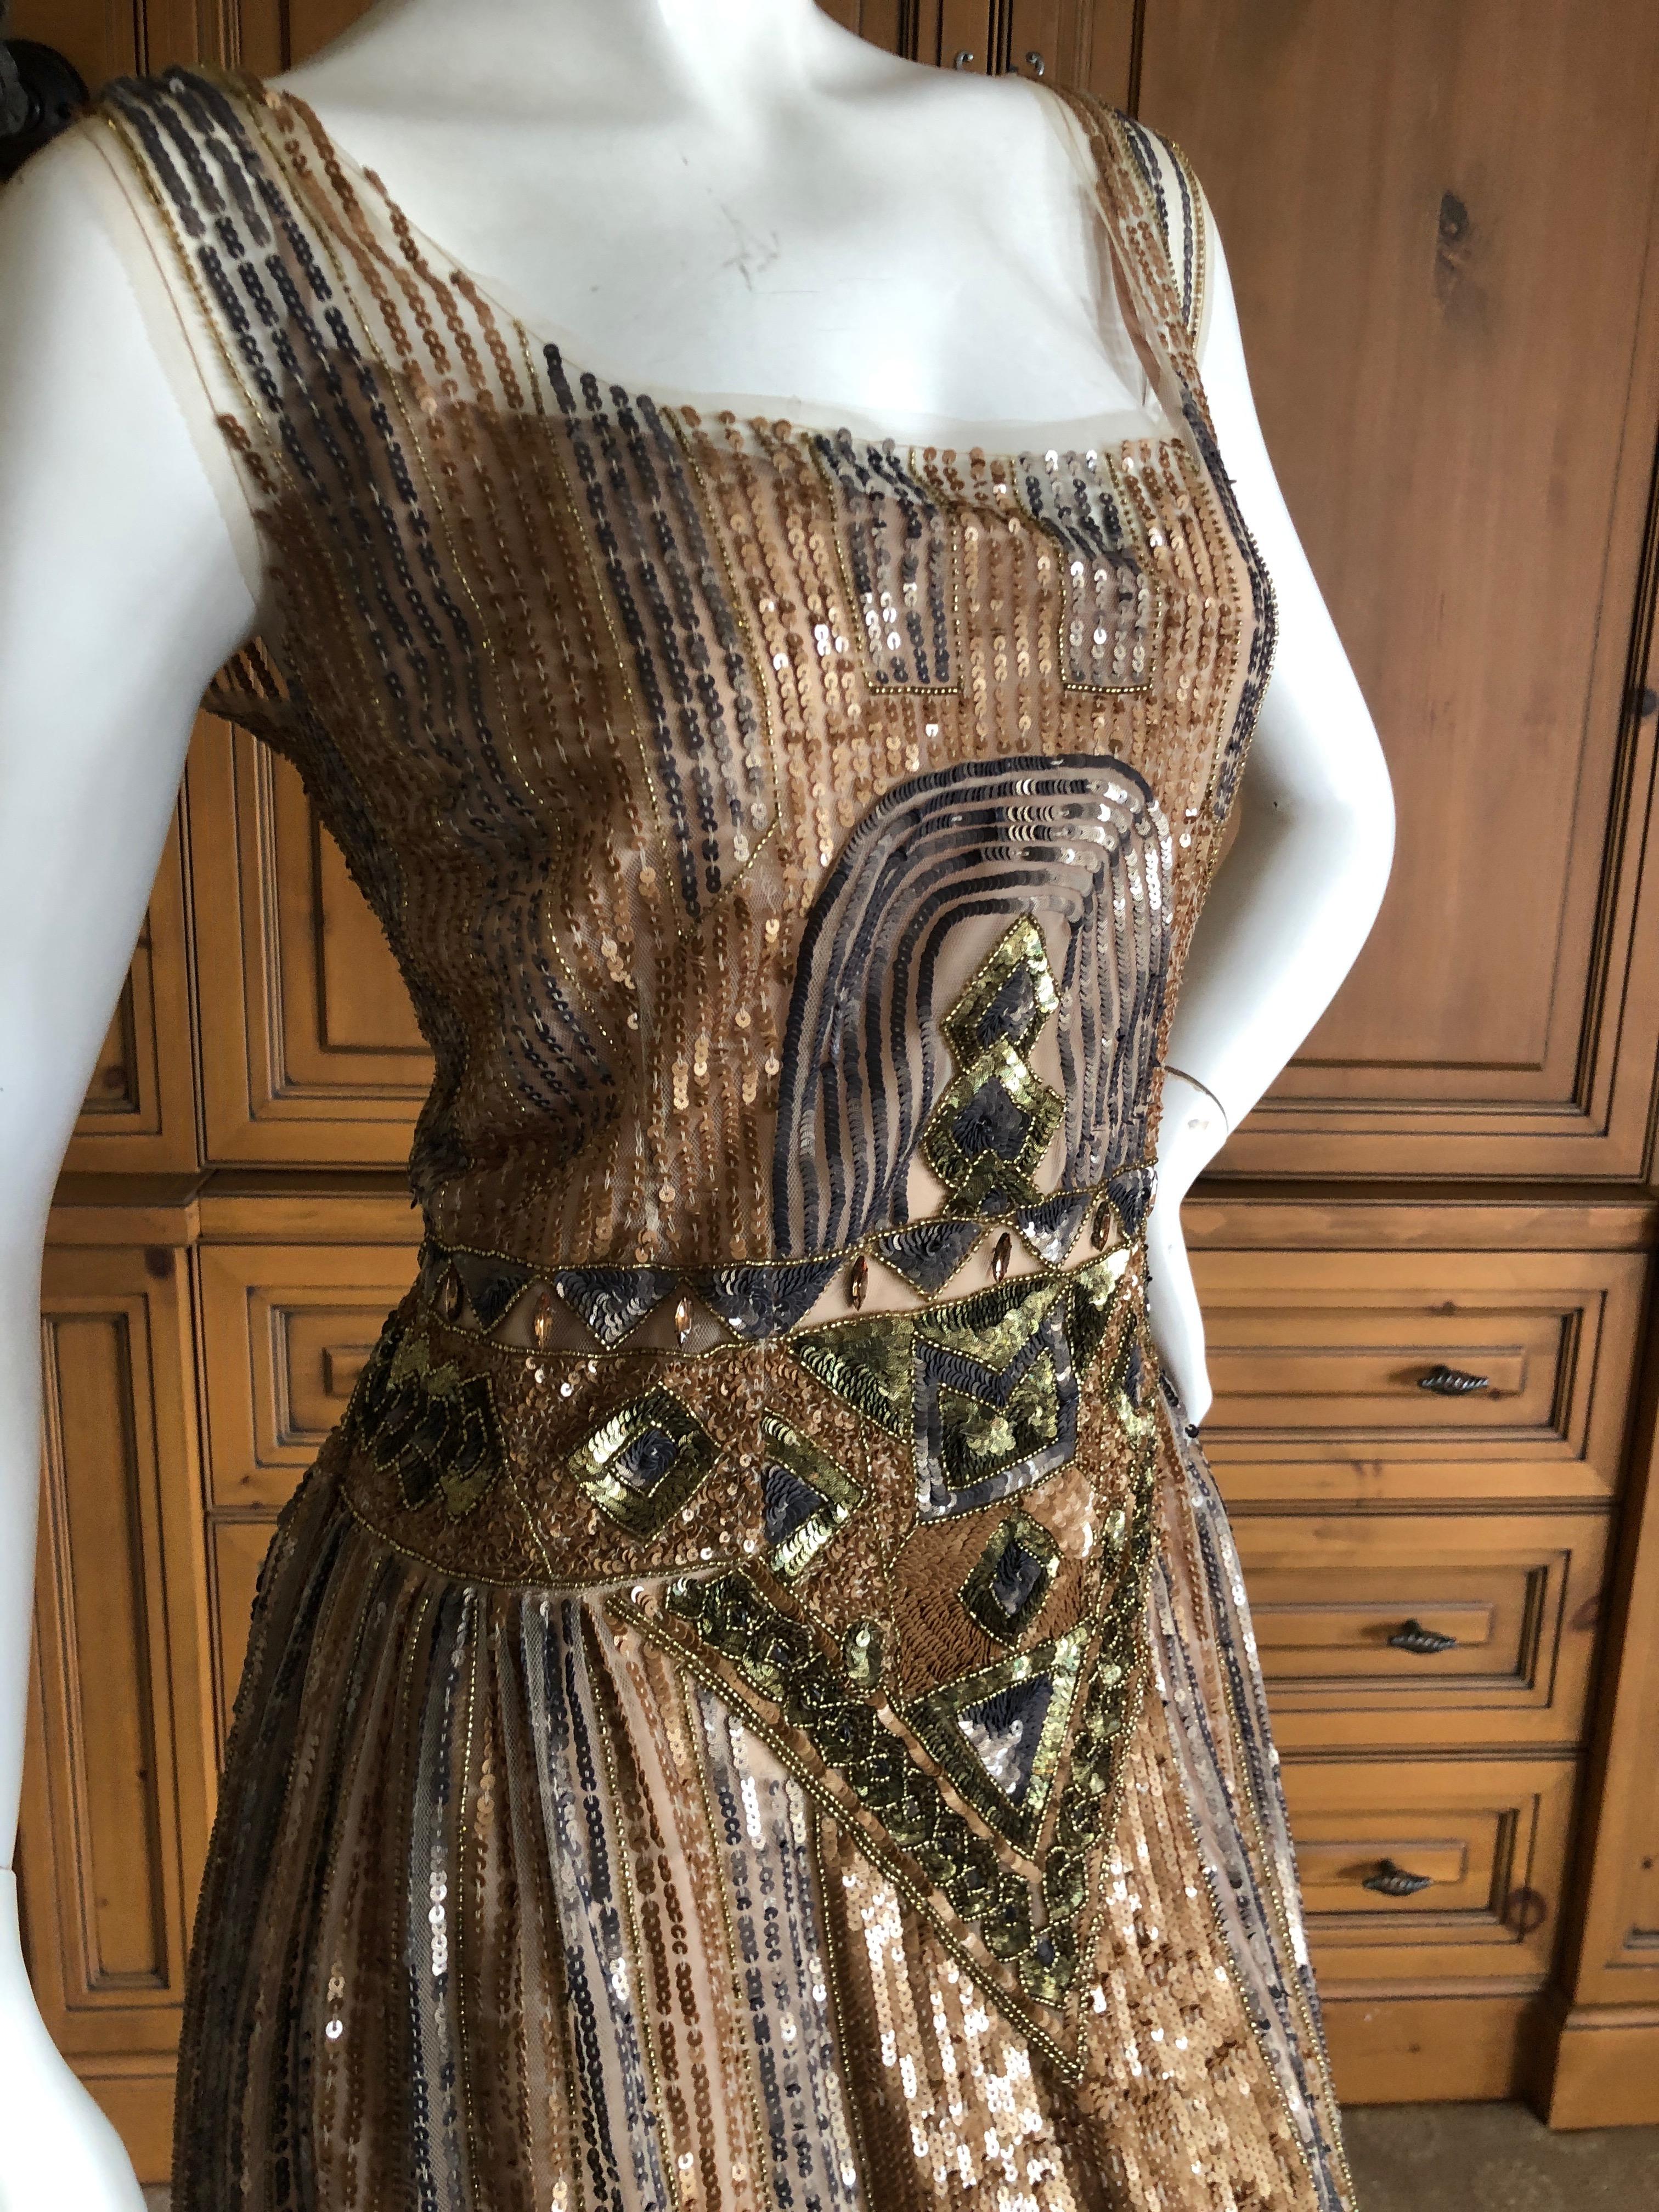 Alberta Ferretti Low Cut Silk Dress & Slip with Glass Bead Embellishment.
This is so pretty, please use zoom feature to see details.
Size 8
Bust 38